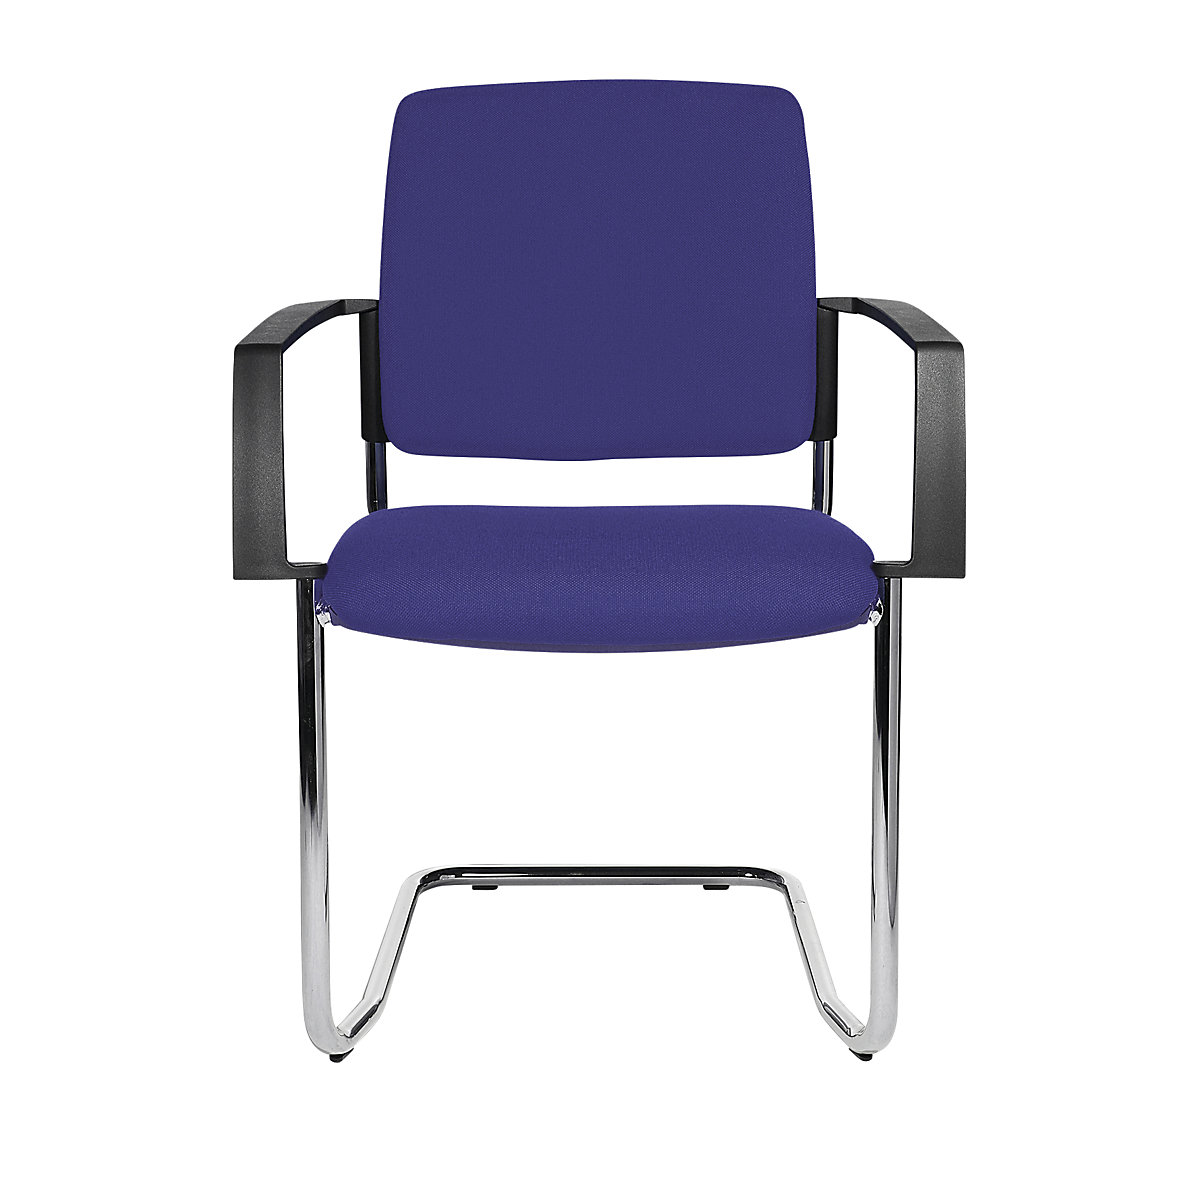 Padded stacking chair - Topstar